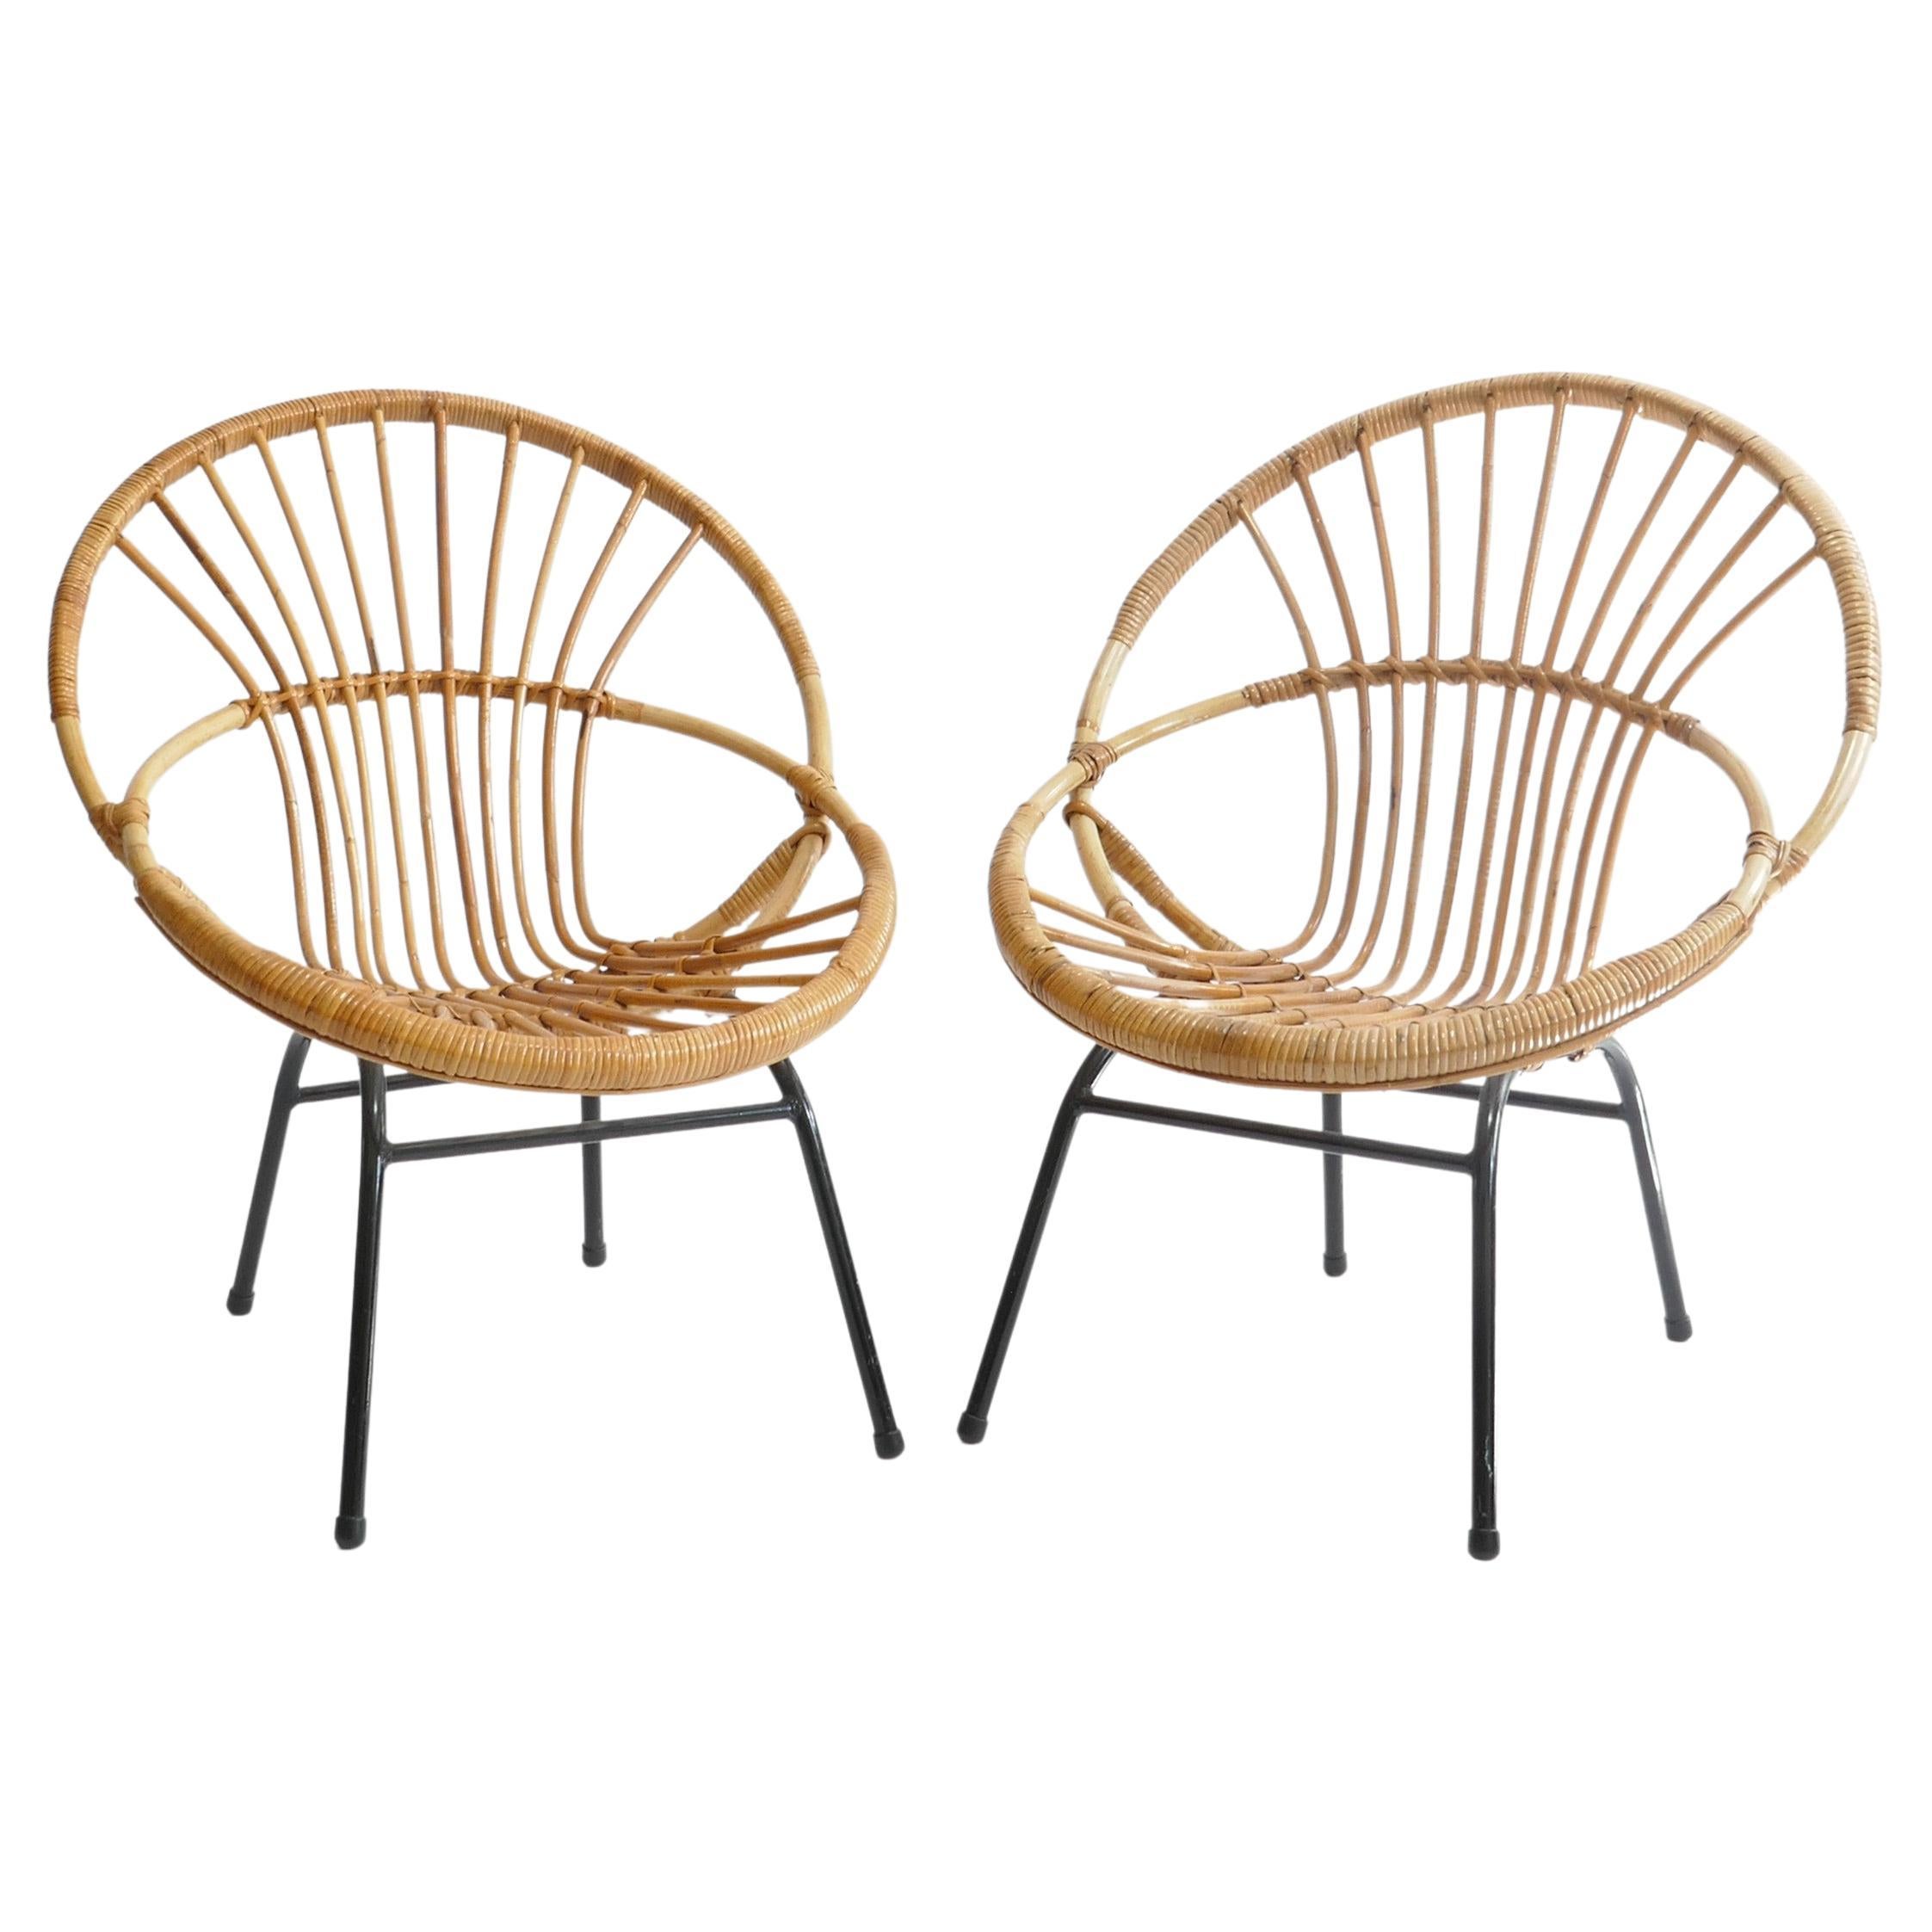 Pair of French Mid-Century Rattan Chairs, France 1950s For Sale